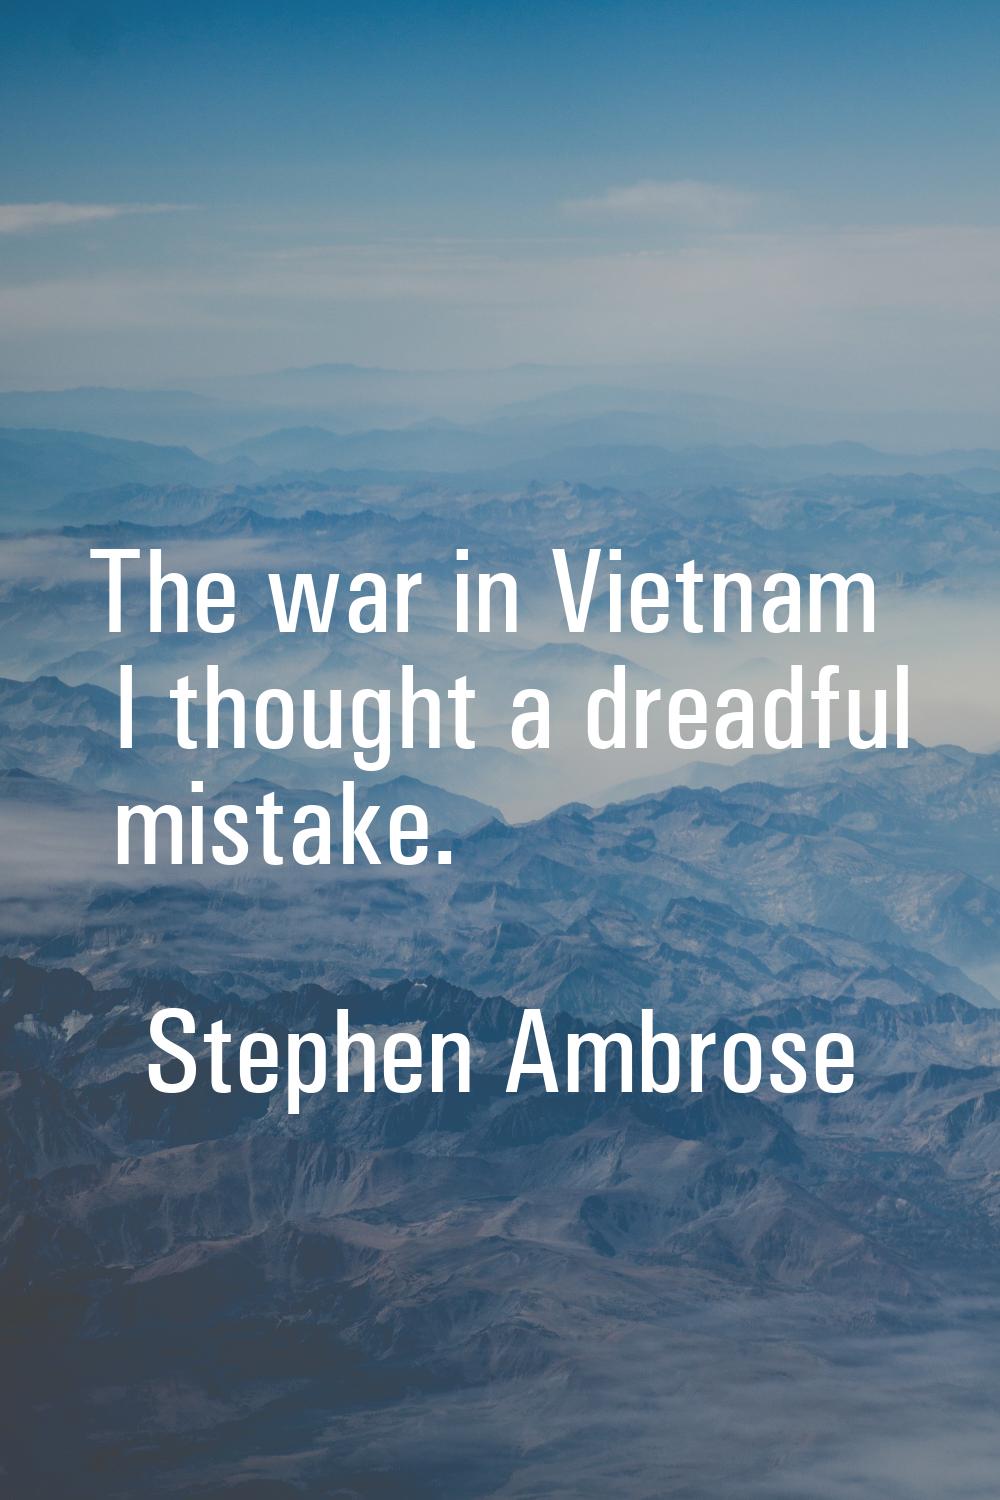 The war in Vietnam I thought a dreadful mistake.